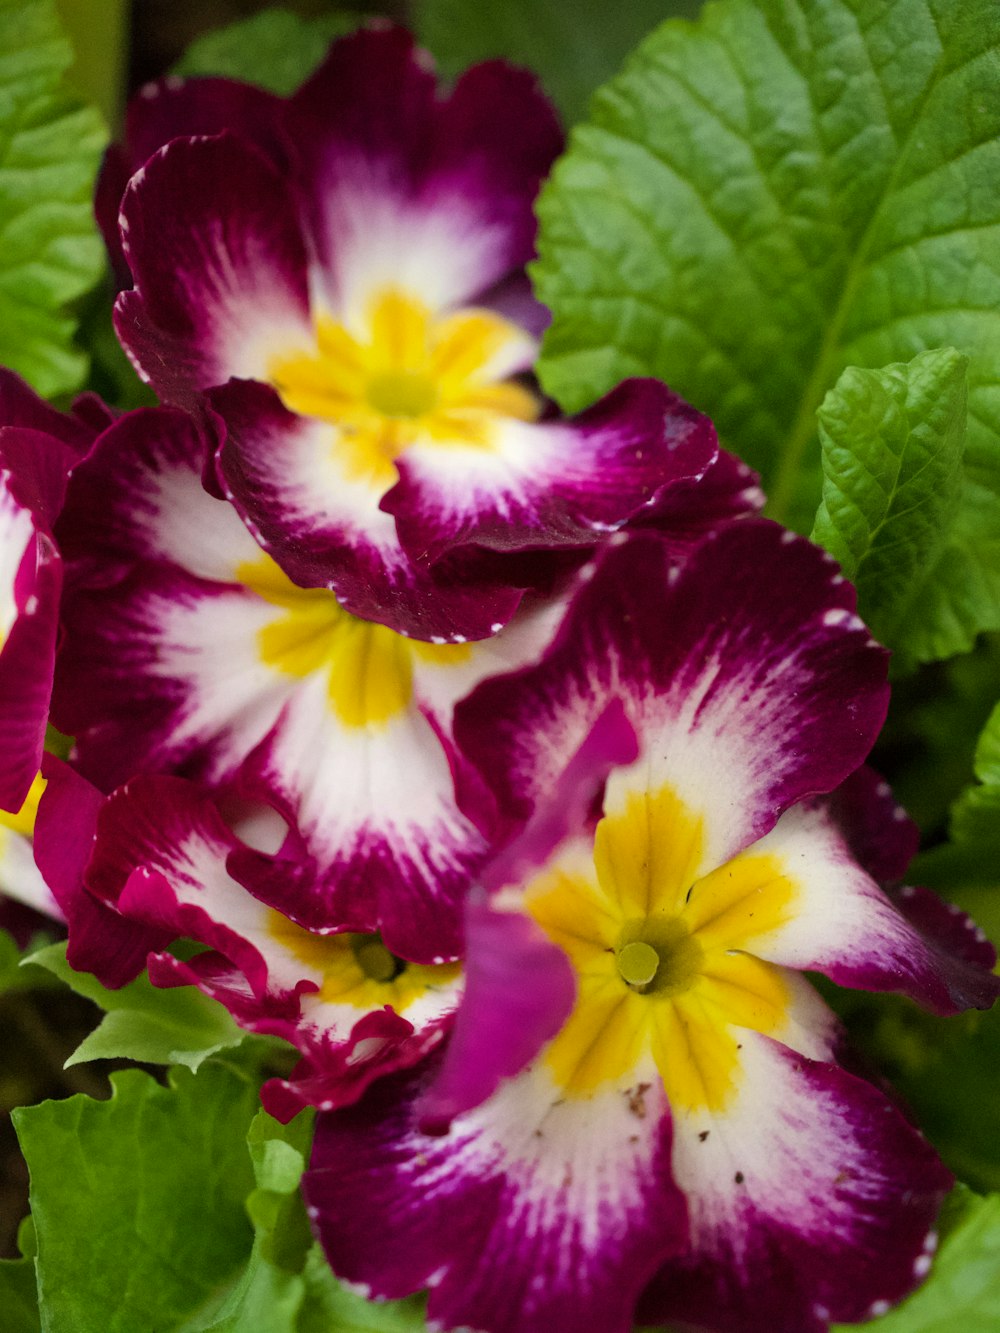 purple and white flowers with green leaves in the background